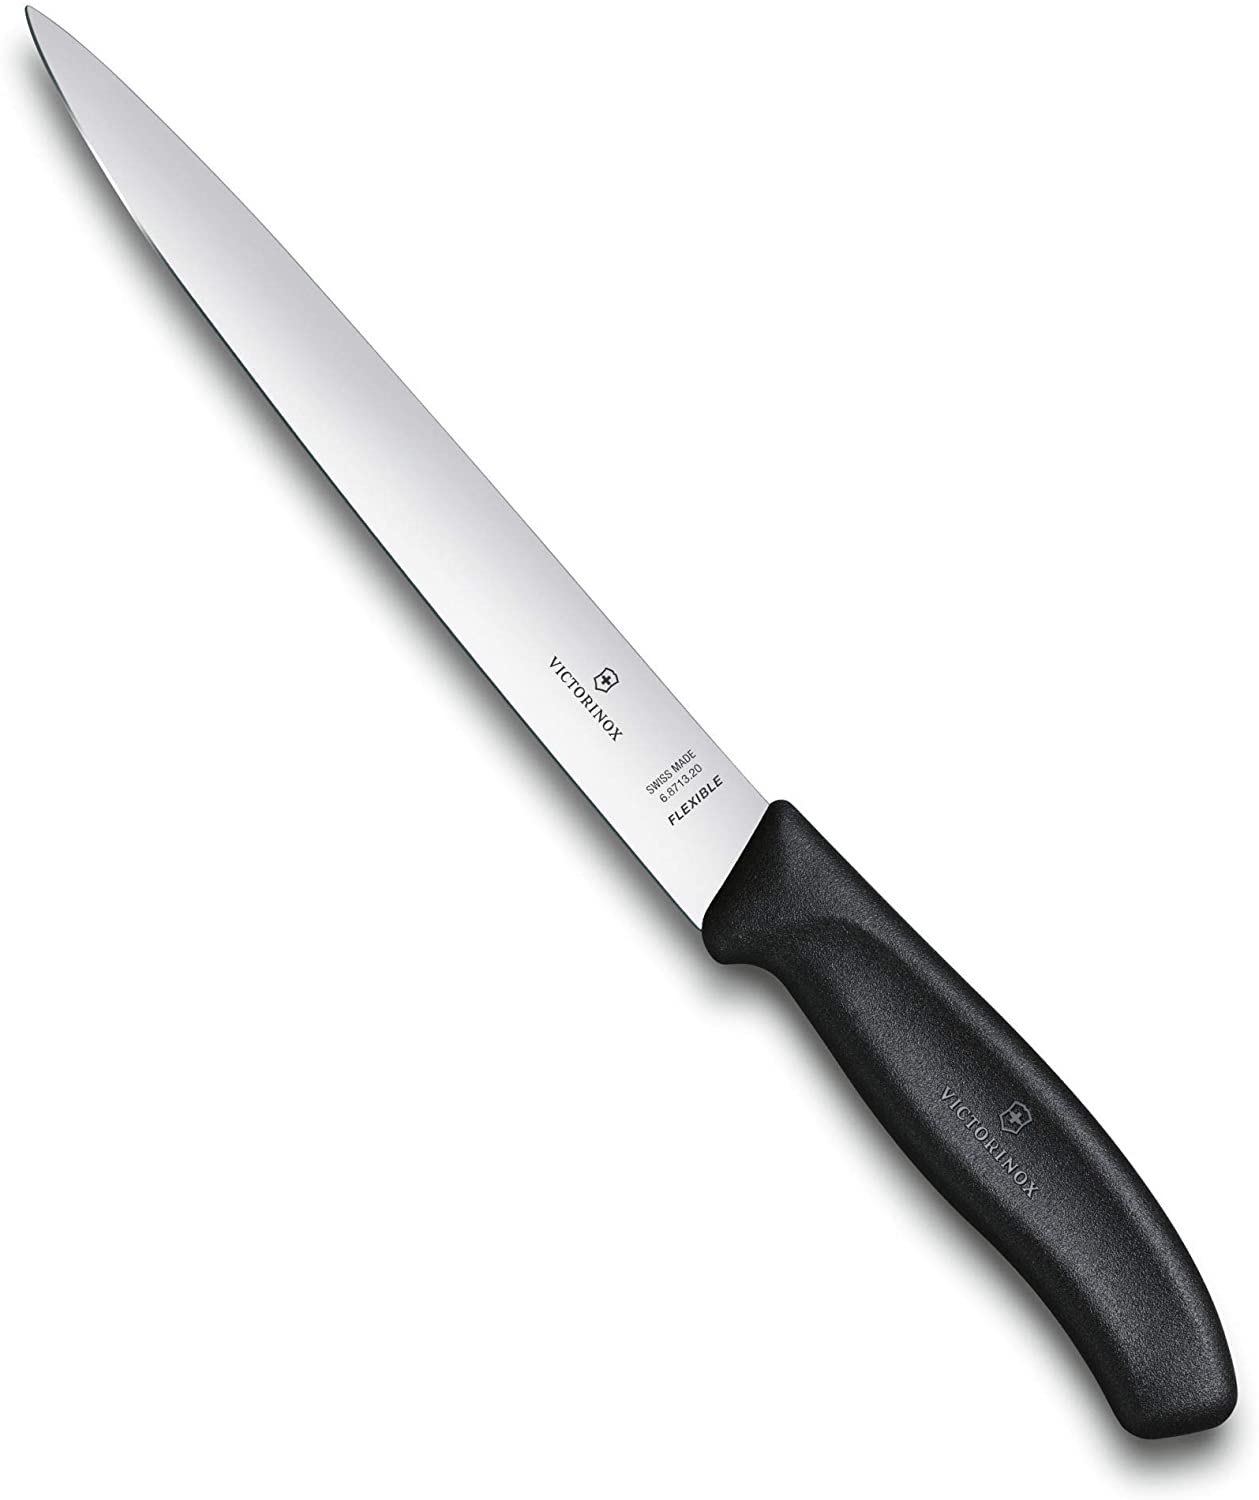 Victorinox 20 cm Swiss Classic Filleting Knife with Flexible Blade in Blister Pack, Black